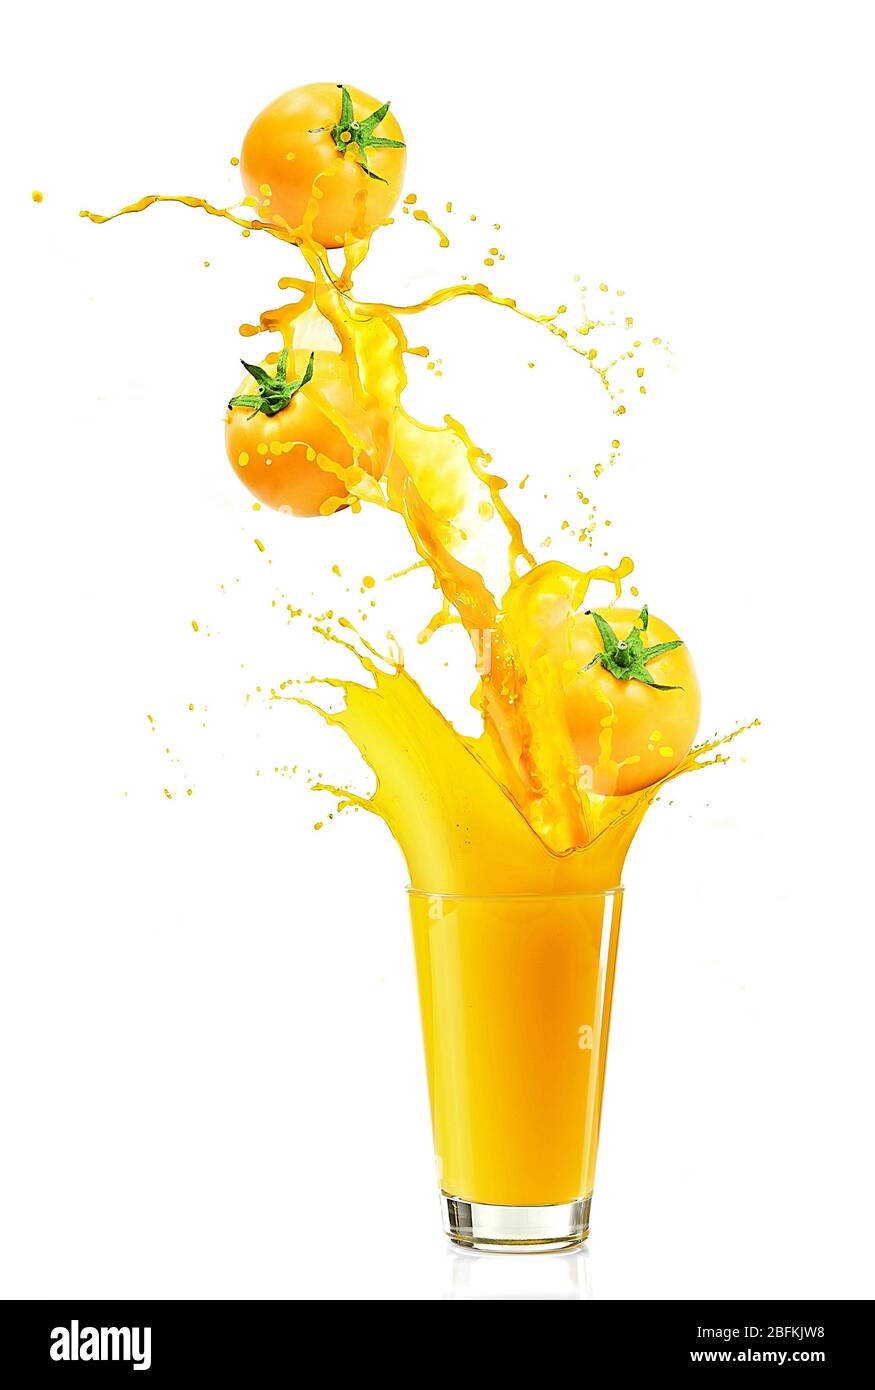 Juice splash in glass with yellow tomatoes isolated on white Stock Photo